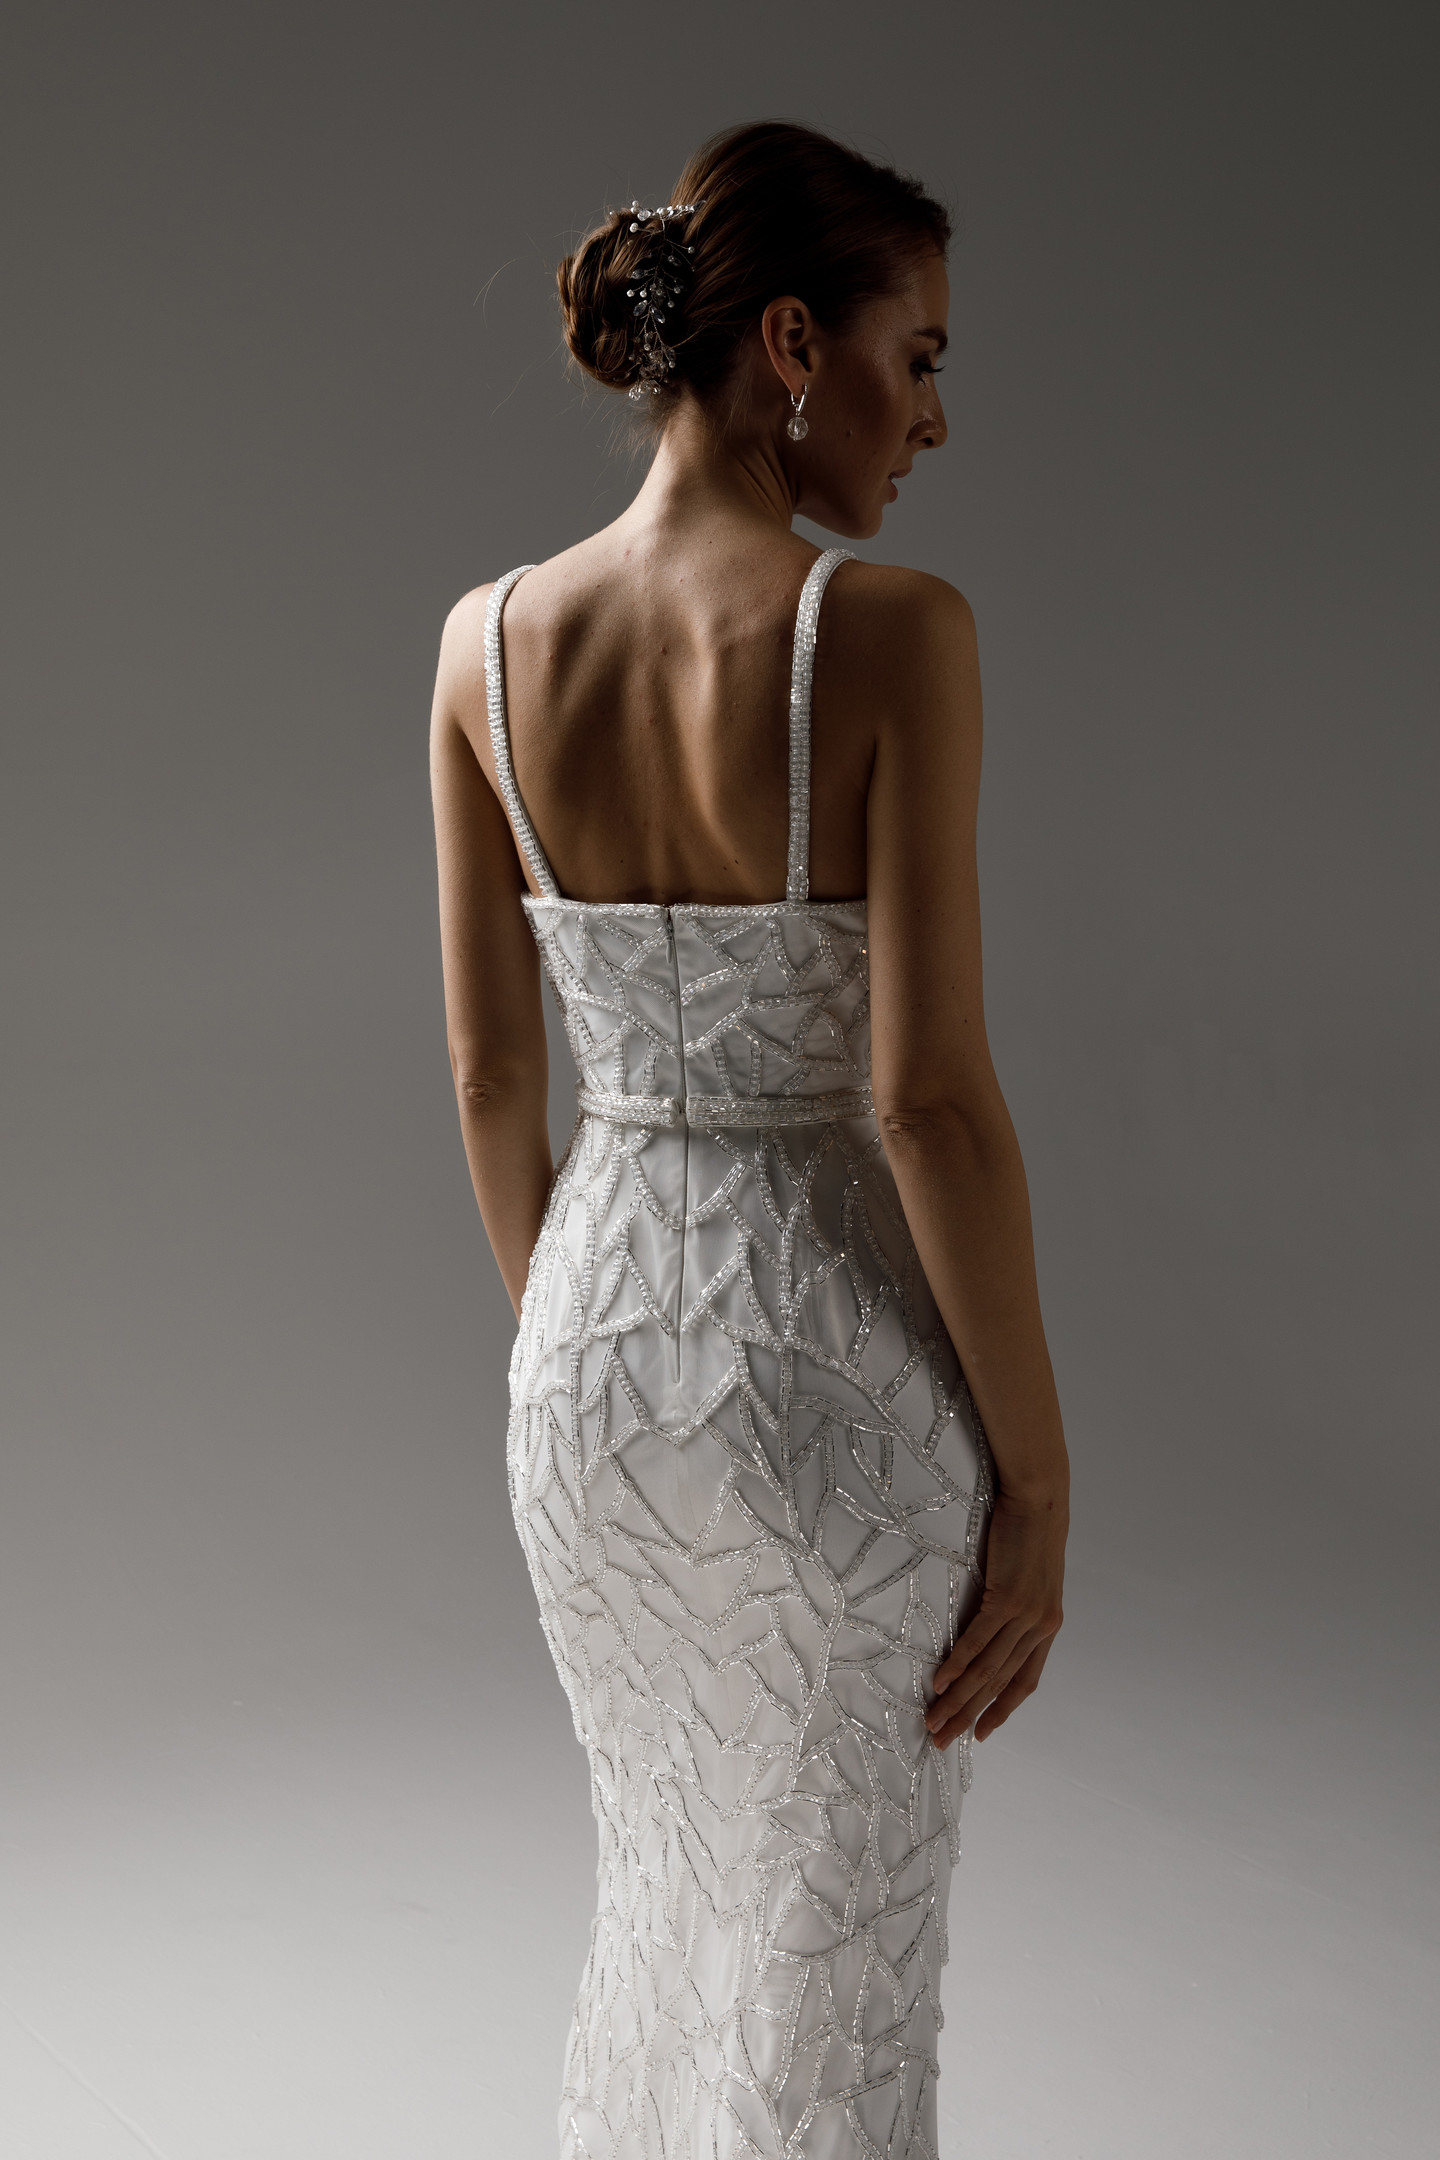 Felicity gown, 2021, couture, dress, bridal, off-white, embroidery, sheath silhouette